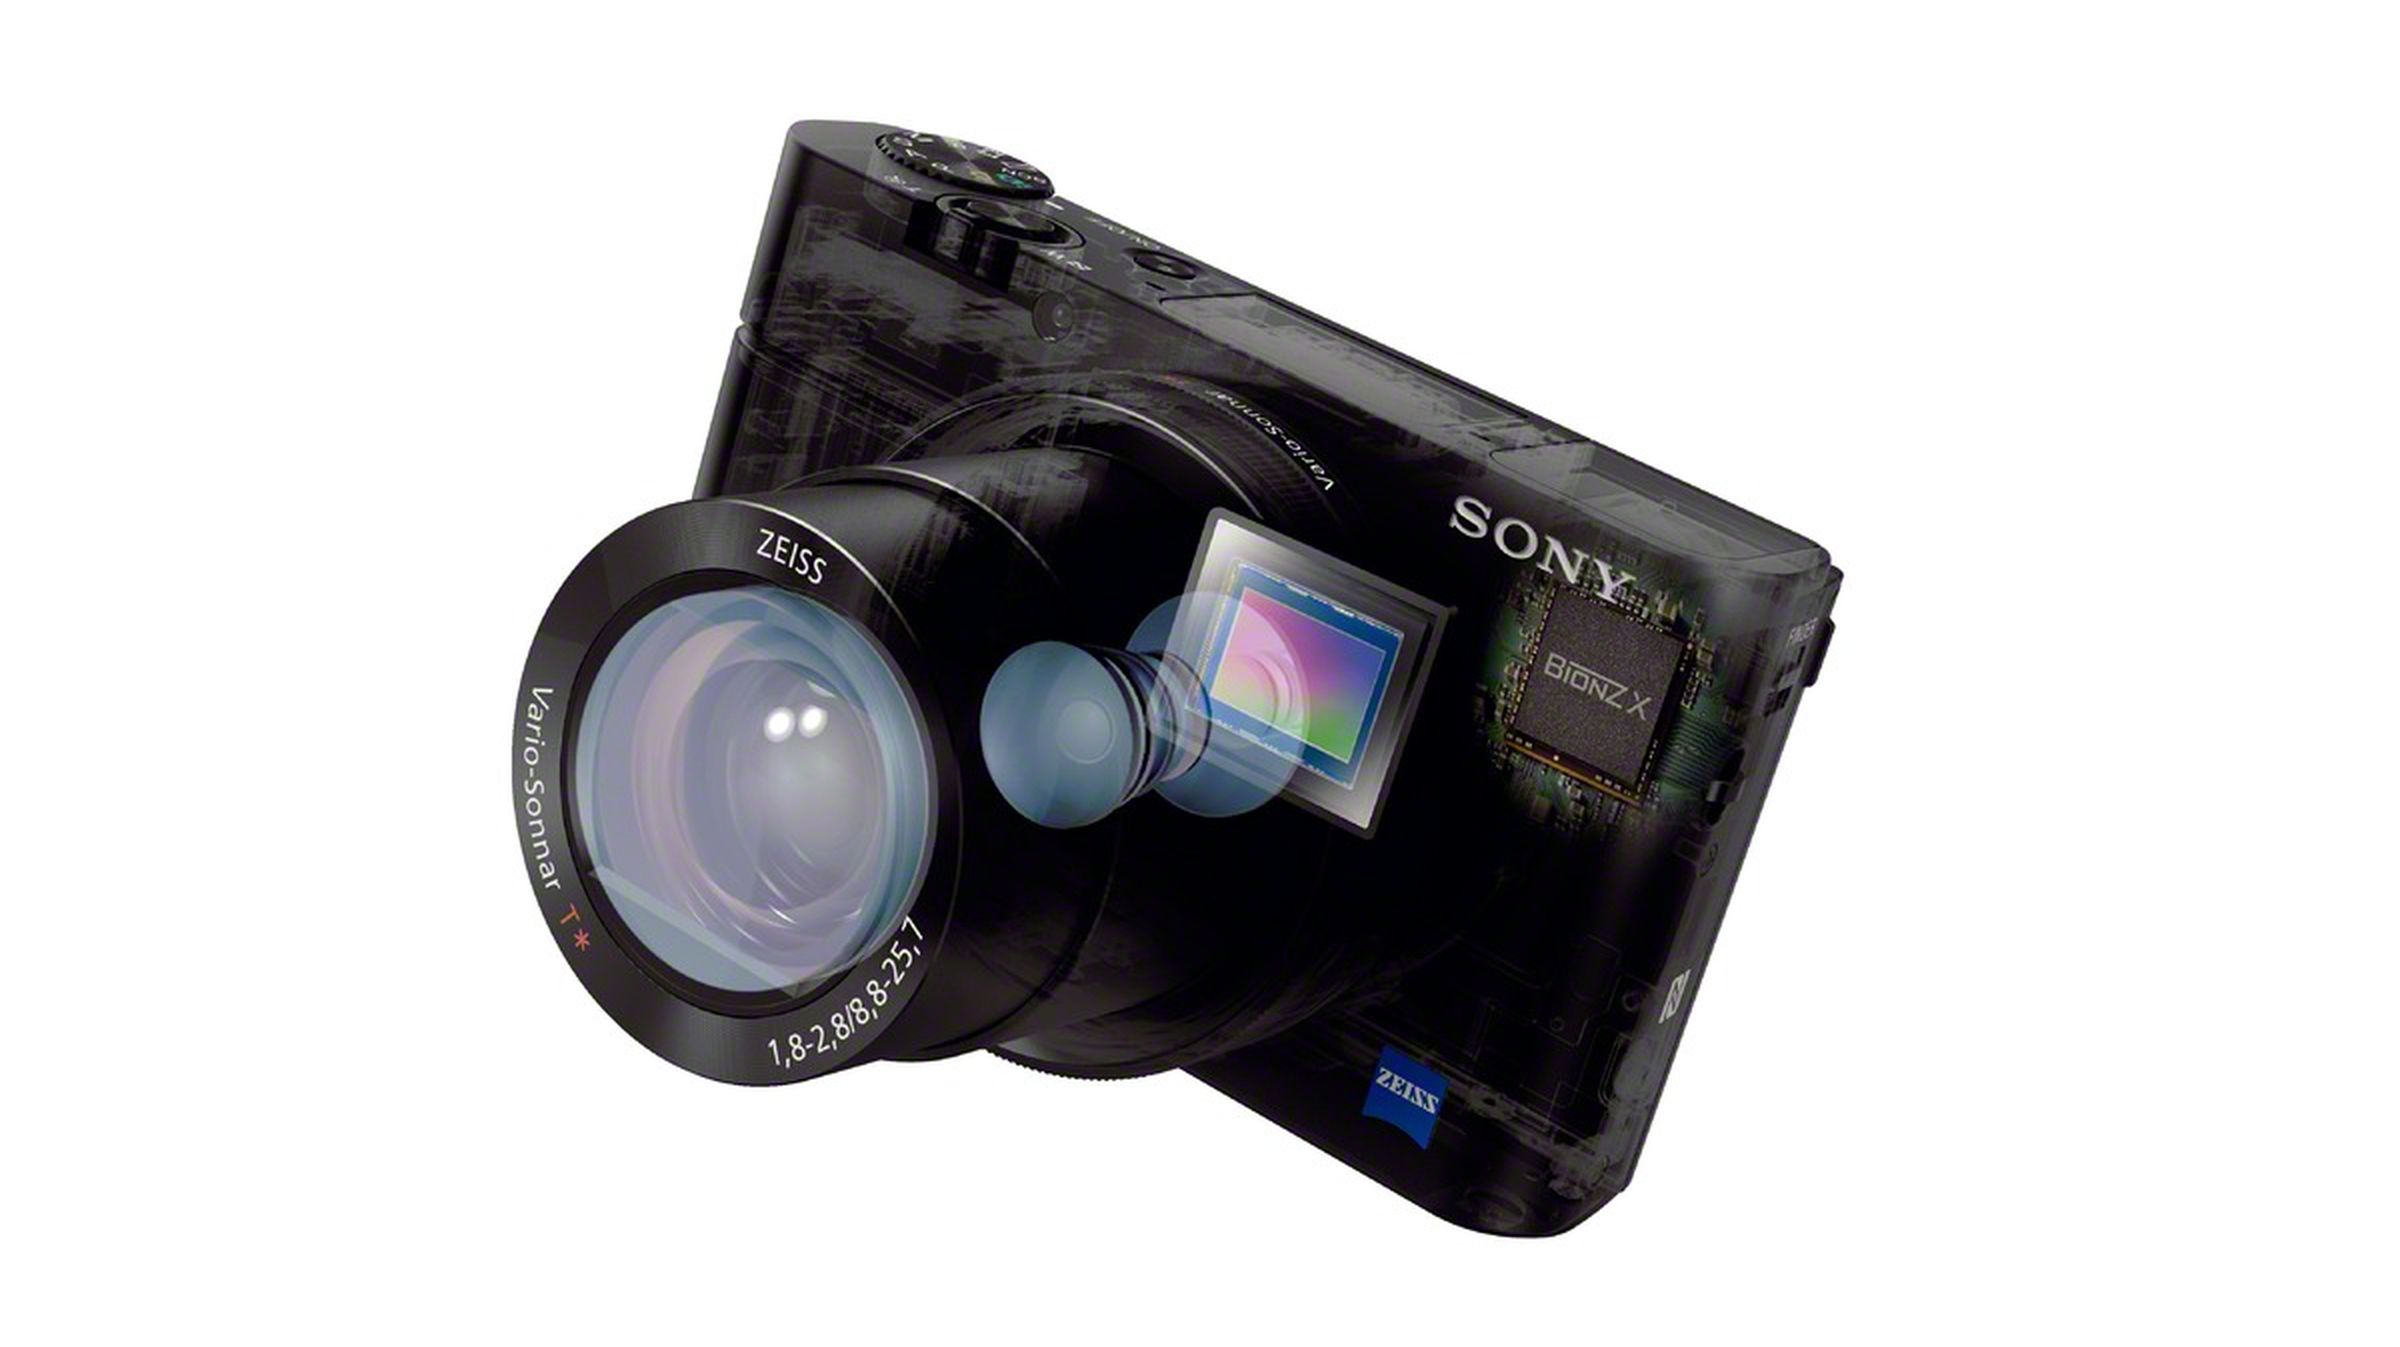 Sony RX100M3 images